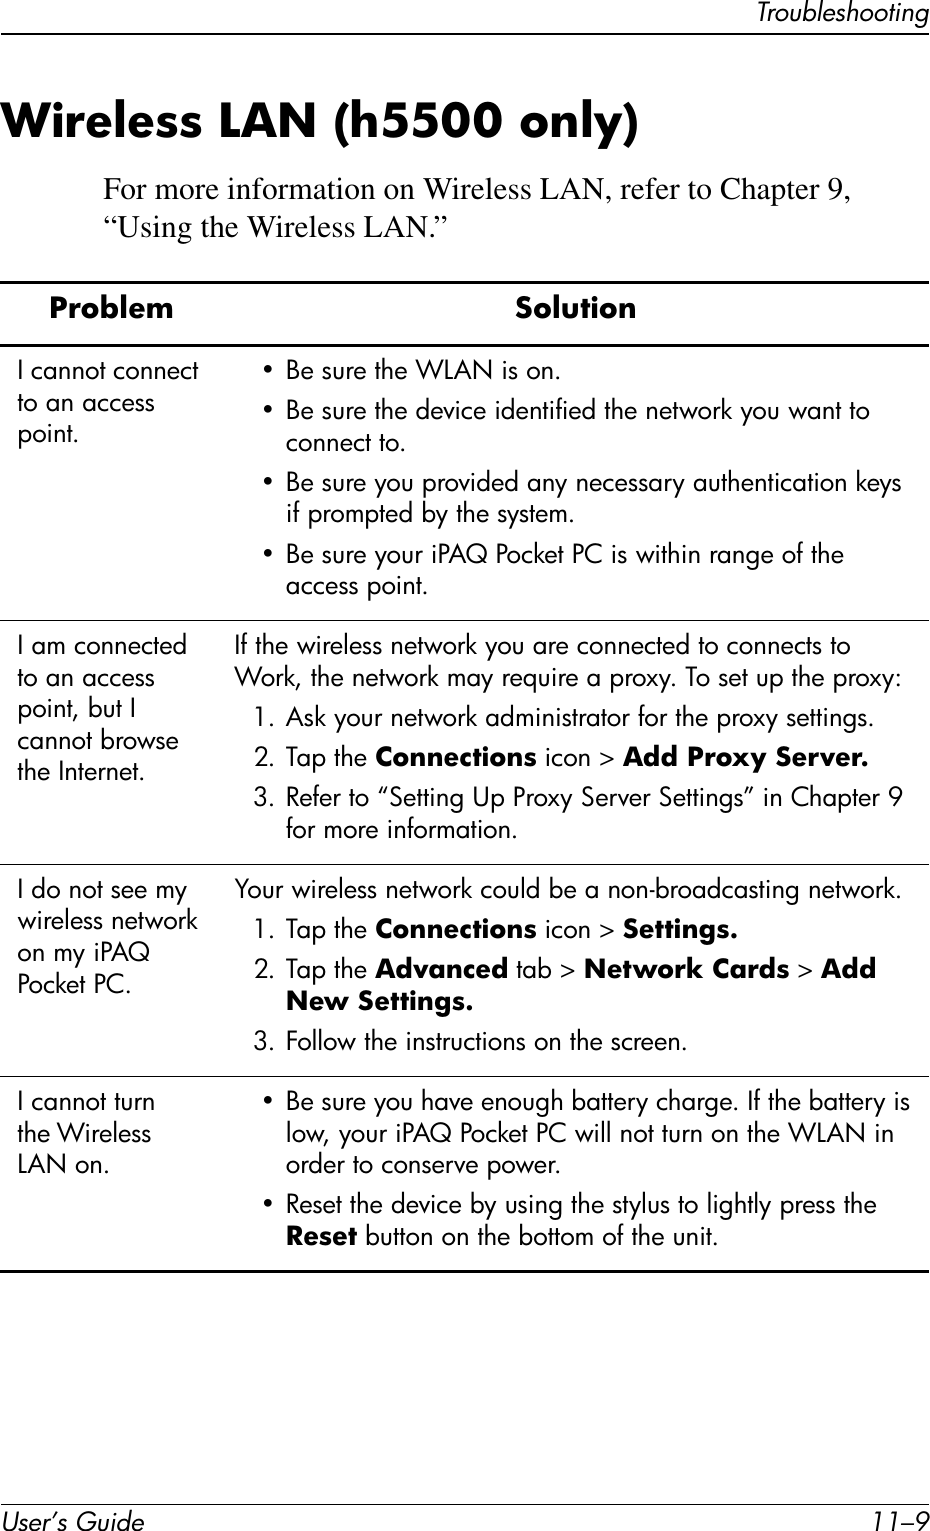 TroubleshootingUser’s Guide 11–9Wireless LAN (h5500 only)For more information on Wireless LAN, refer to Chapter 9, “Using the Wireless LAN.”Problem SolutionI cannot connect to an access point.• Be sure the WLAN is on.• Be sure the device identified the network you want to connect to.• Be sure you provided any necessary authentication keys if prompted by the system.• Be sure your iPAQ Pocket PC is within range of the access point.I am connected to an access point, but I cannot browse the Internet.If the wireless network you are connected to connects to Work, the network may require a proxy. To set up the proxy:1. Ask your network administrator for the proxy settings.2. Tap the Connections icon &gt; Add Proxy Server.3. Refer to “Setting Up Proxy Server Settings” in Chapter 9 for more information.I do not see my wireless network on my iPAQ Pocket PC.Your wireless network could be a non-broadcasting network.1. Tap the Connections icon &gt; Settings.2. Tap the Advanced tab &gt; Network Cards &gt; Add New Settings.3. Follow the instructions on the screen.I cannot turn the Wireless LAN on.• Be sure you have enough battery charge. If the battery is low, your iPAQ Pocket PC will not turn on the WLAN in order to conserve power.• Reset the device by using the stylus to lightly press the Reset button on the bottom of the unit.